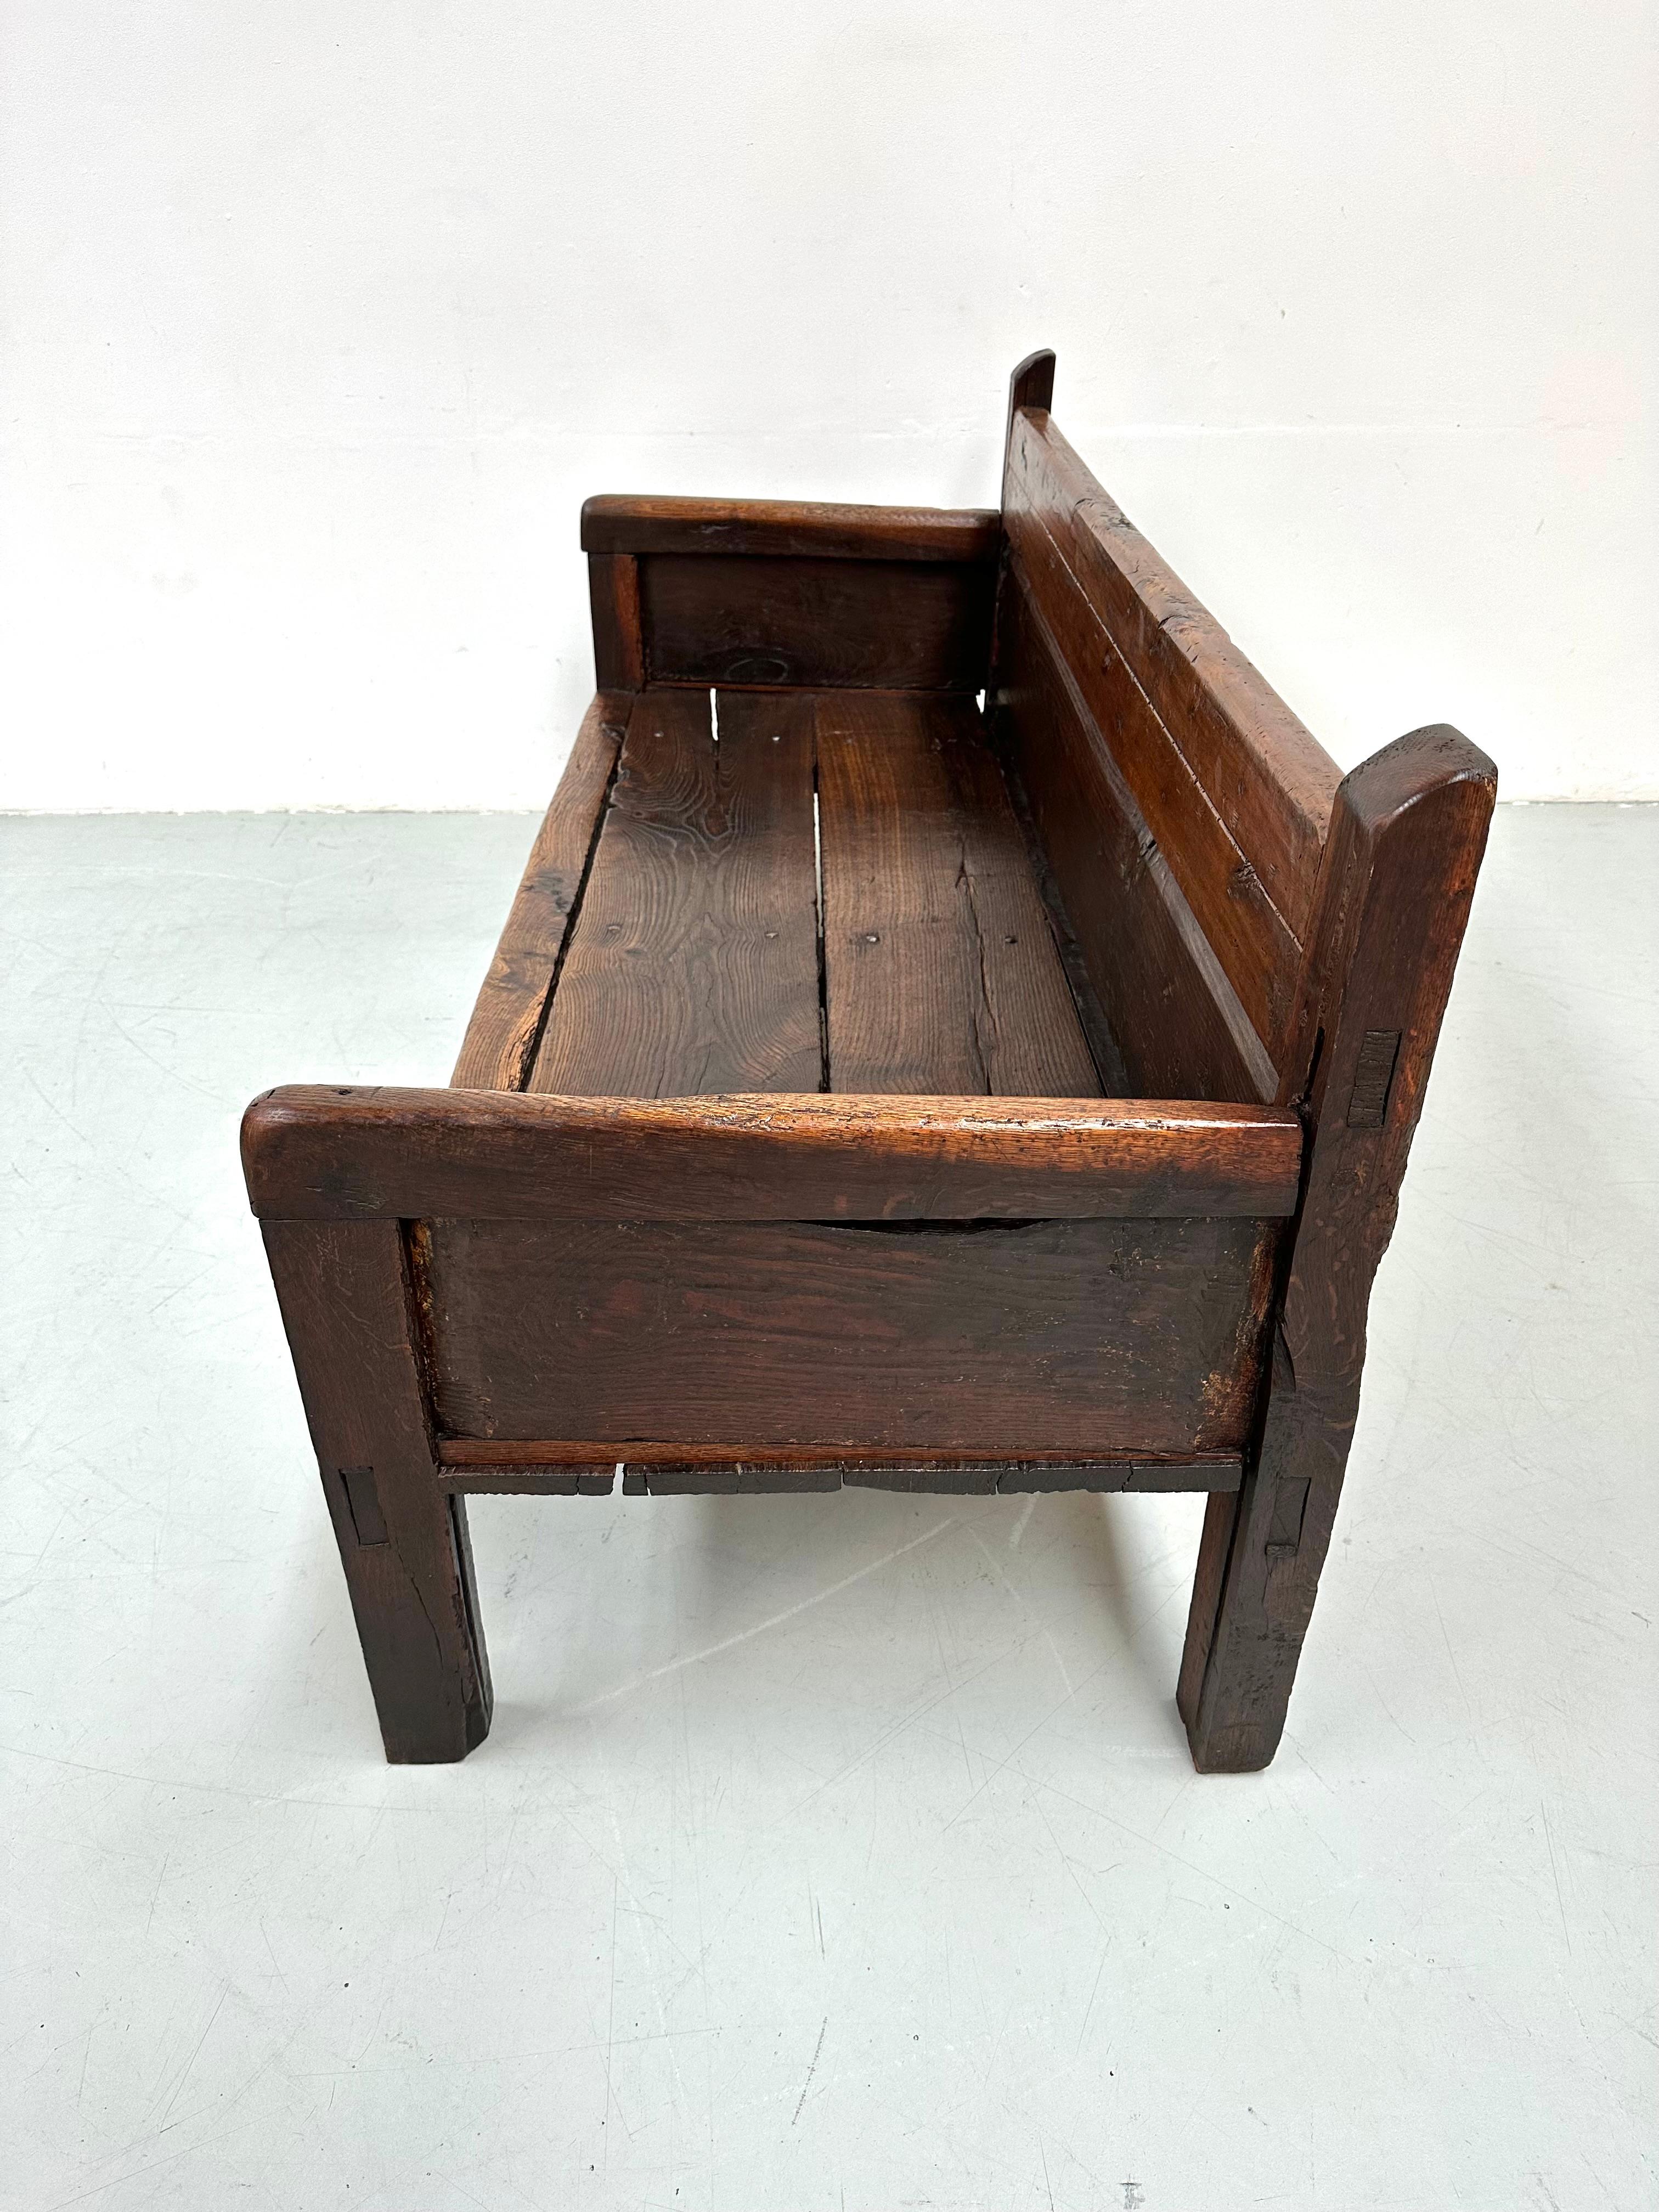 Antique Handmade Minimalistic Spanish Chestnut Wood Bench, Early 19th Century For Sale 11